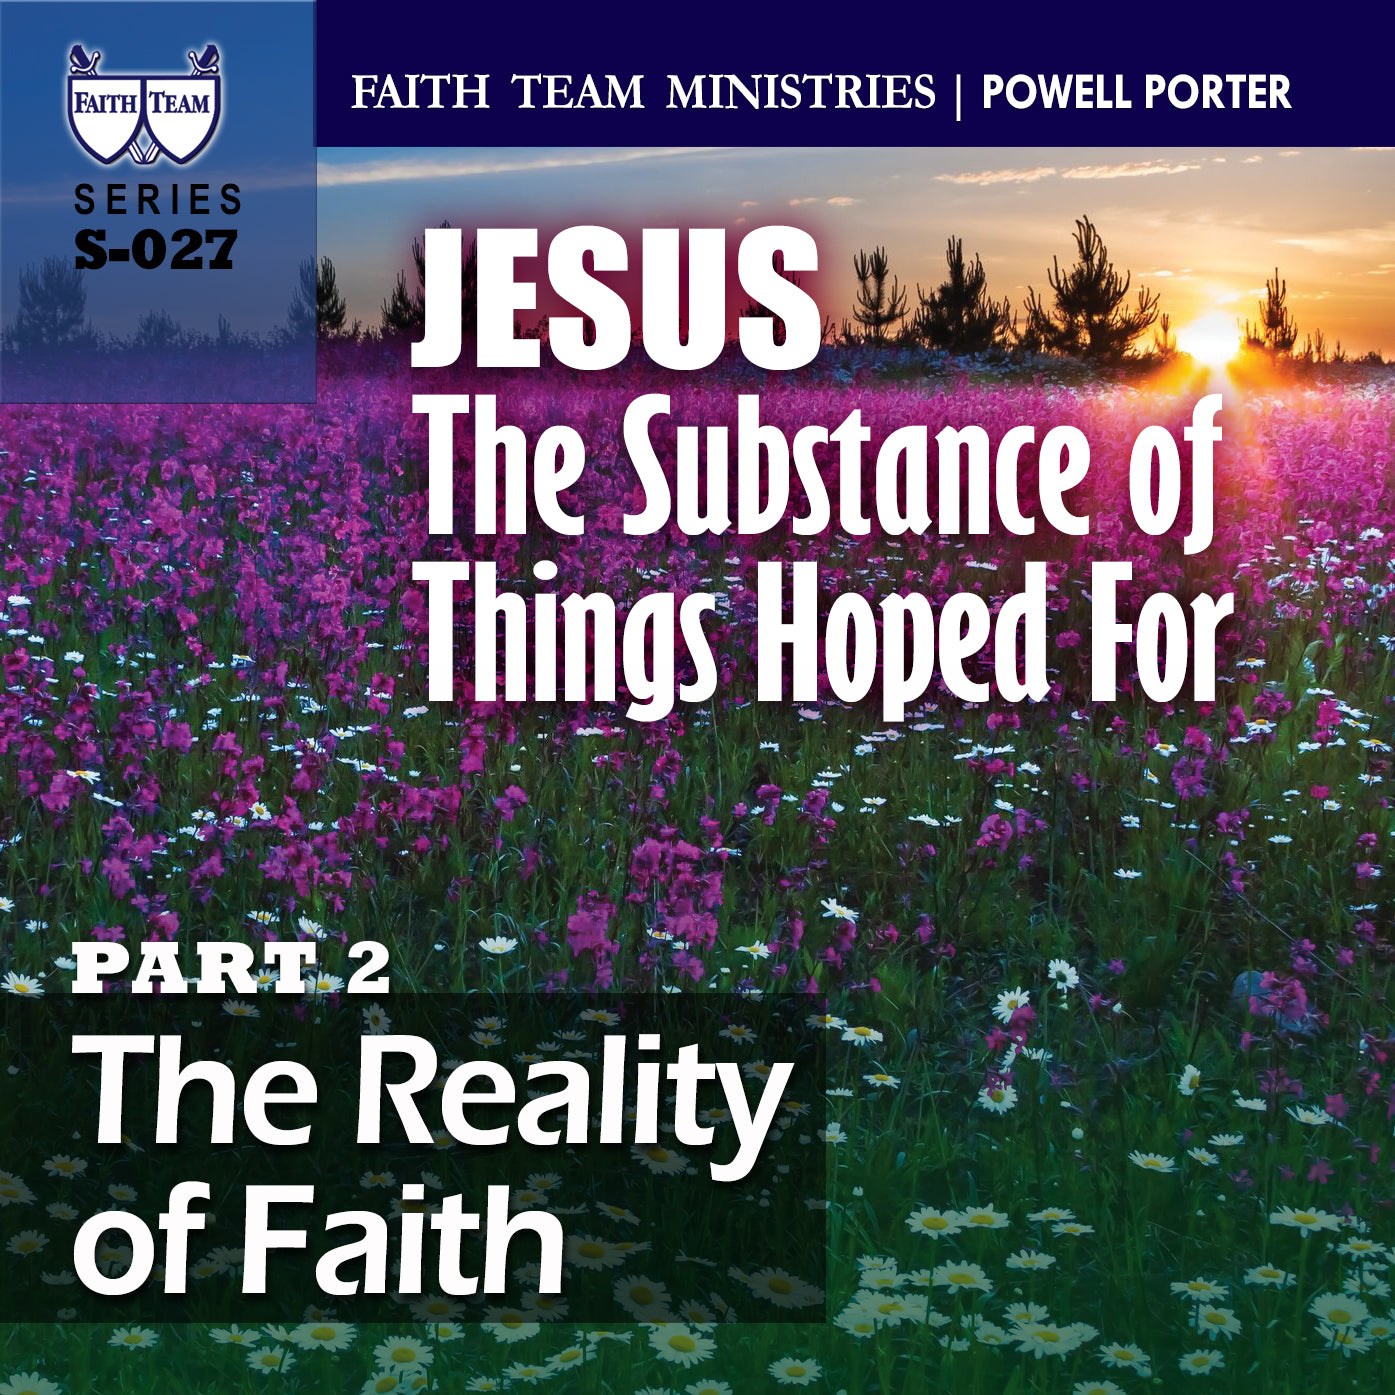 JESUS THE SUBSTANCE OF THINGS HOPED FOR | Part 2: The Reality of Faith